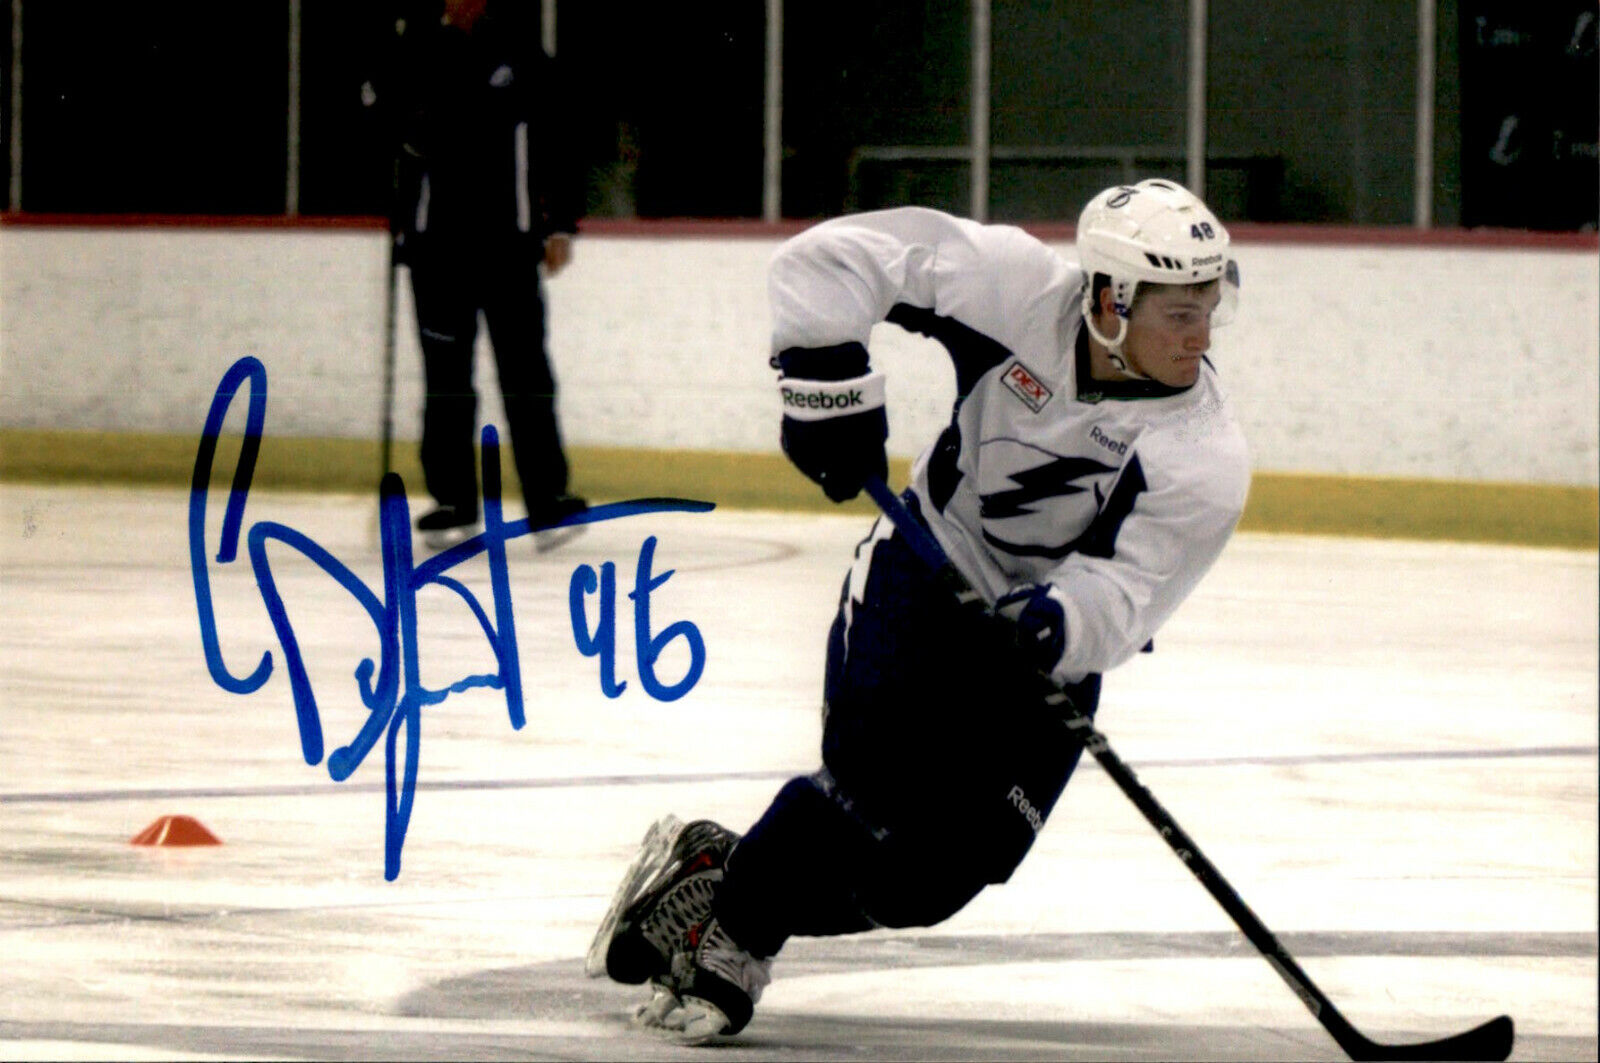 Cristiano DiGiacinto SIGNED 4x6 Photo Poster painting TAMPA BAY LIGHTNING